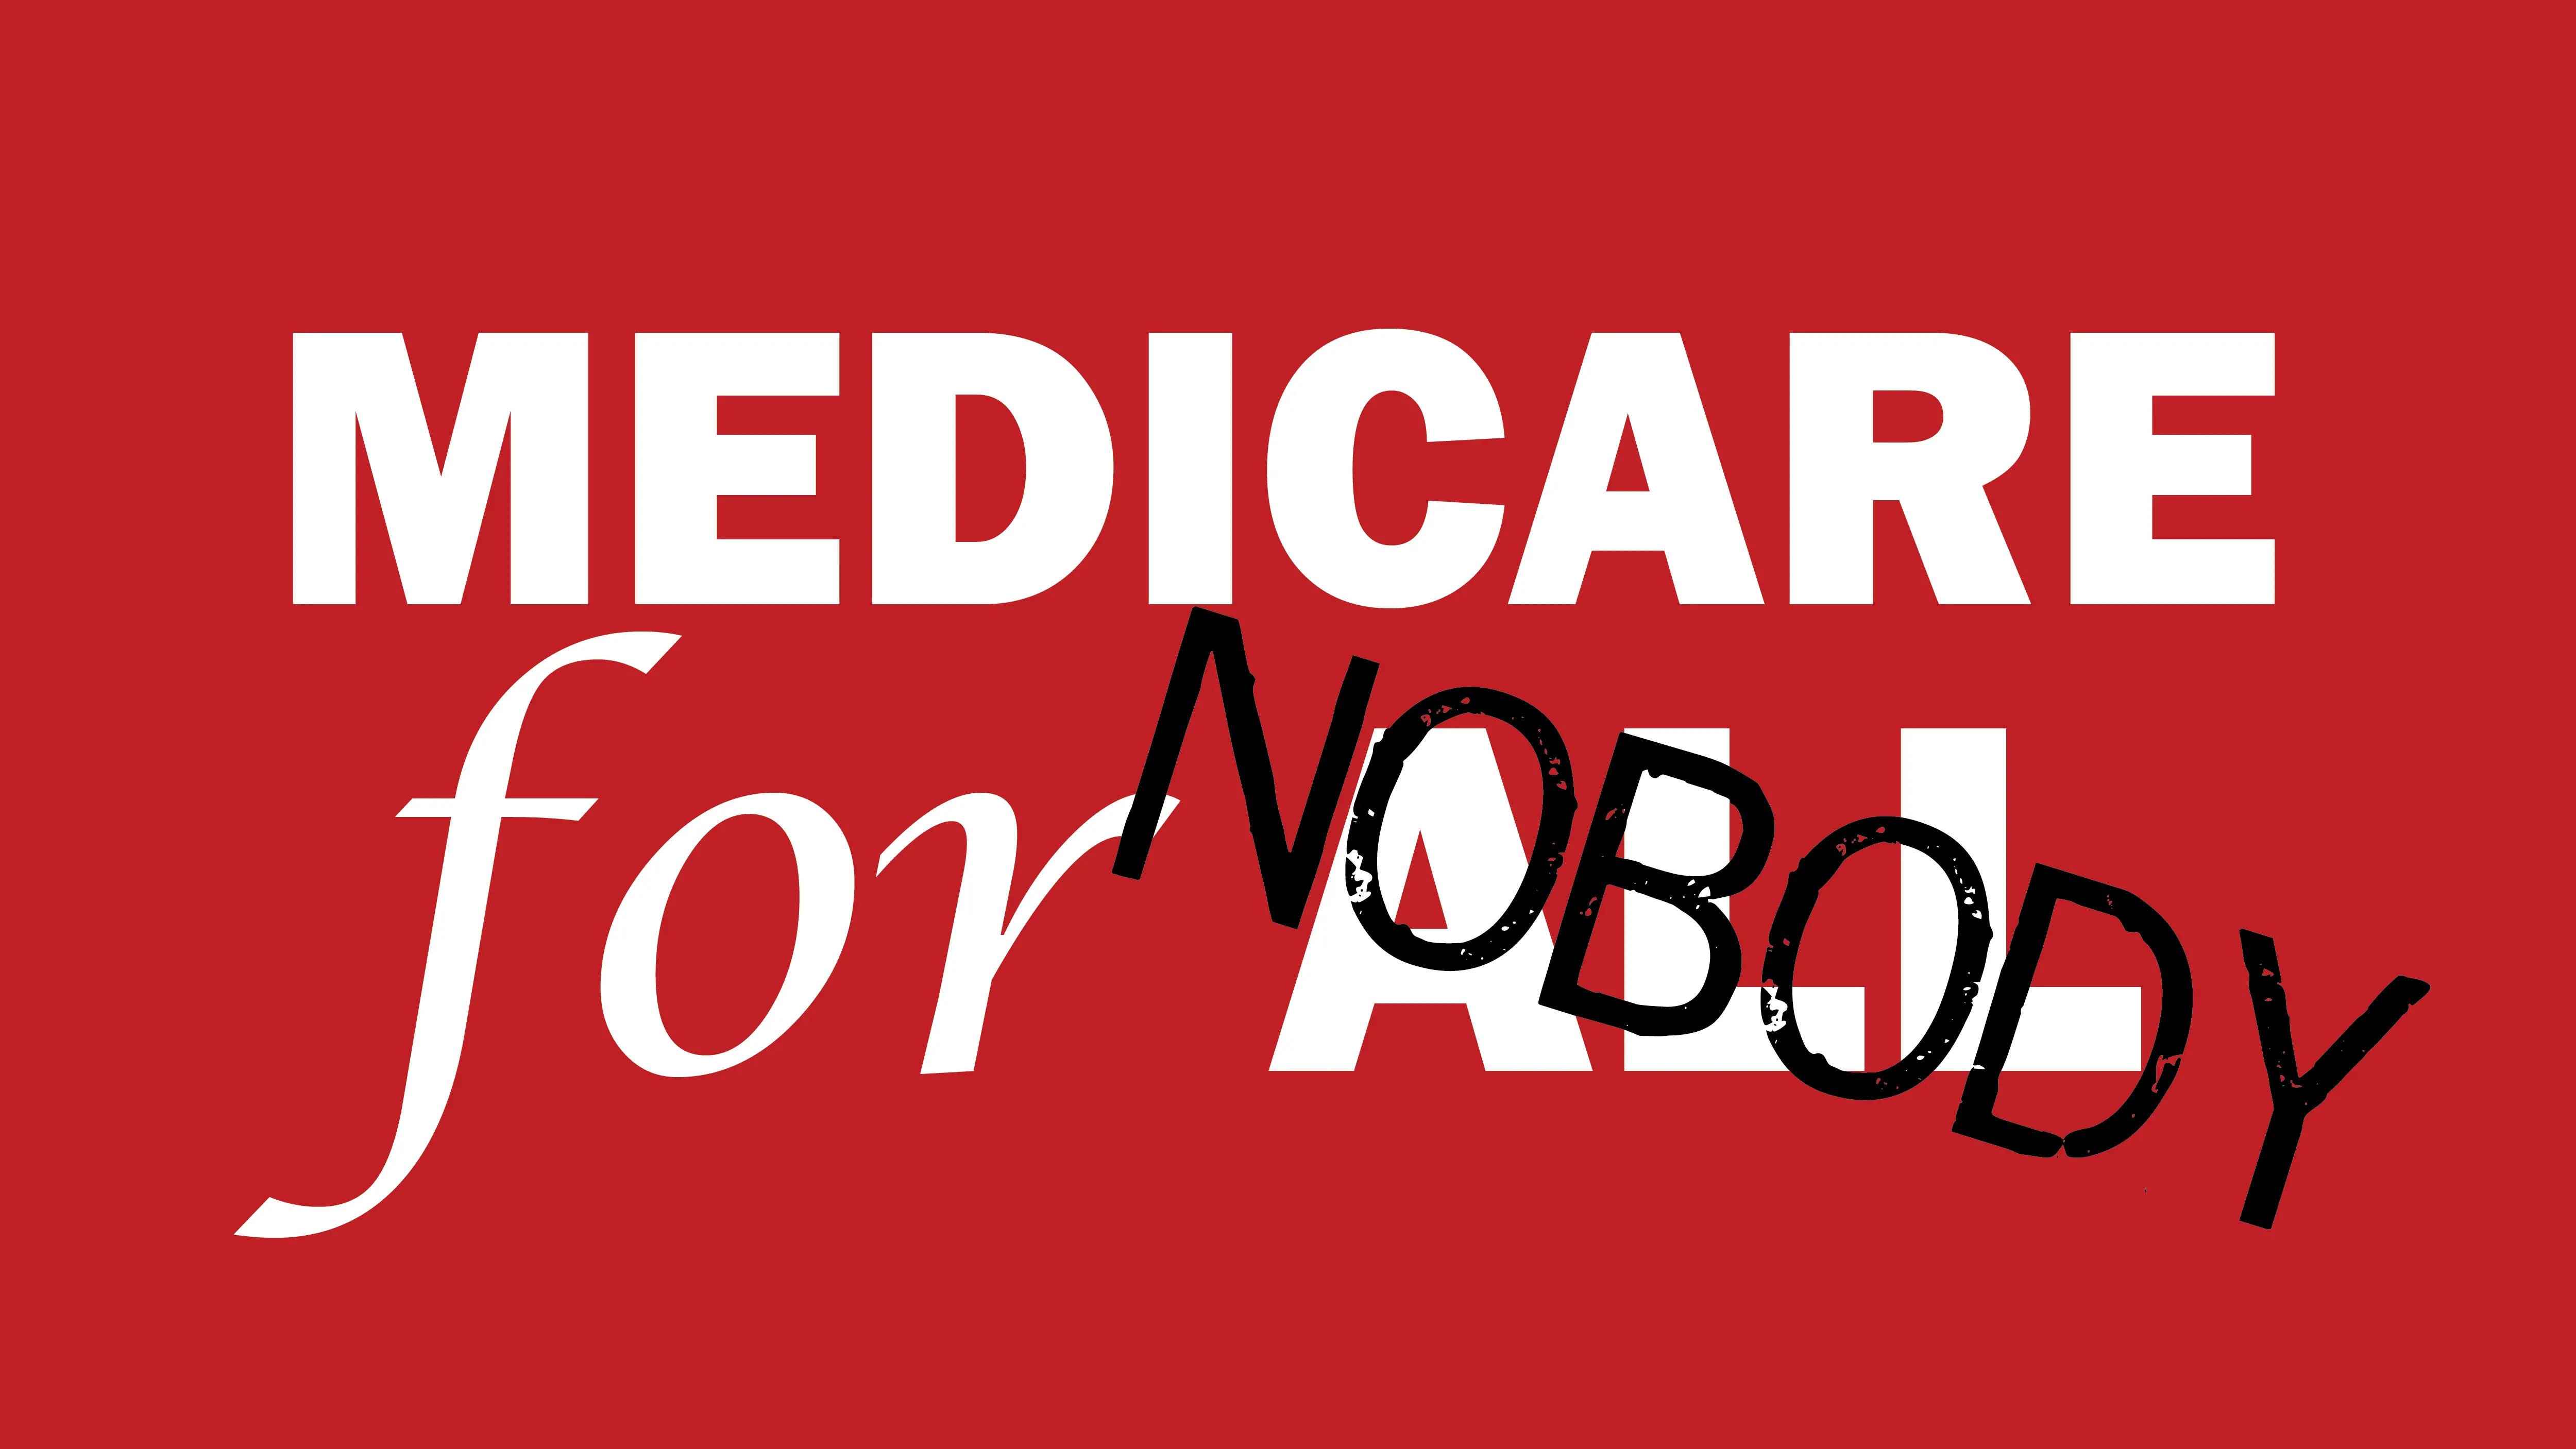 Medicare for All Means Medicare for Nobody